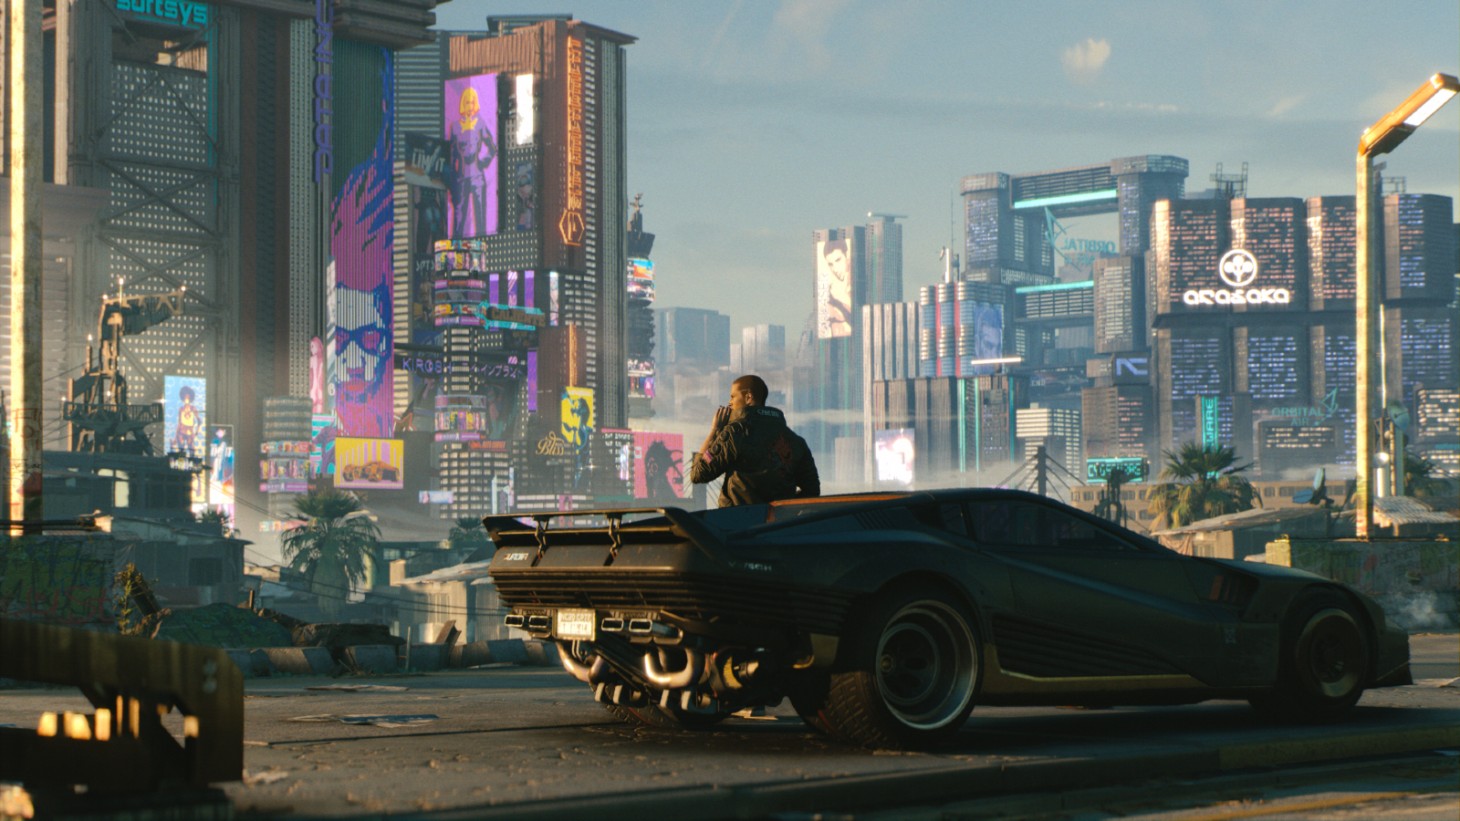 Cyberpunk 2077 Has Received a New Update Based on the Edgerunners Anime -  IGN